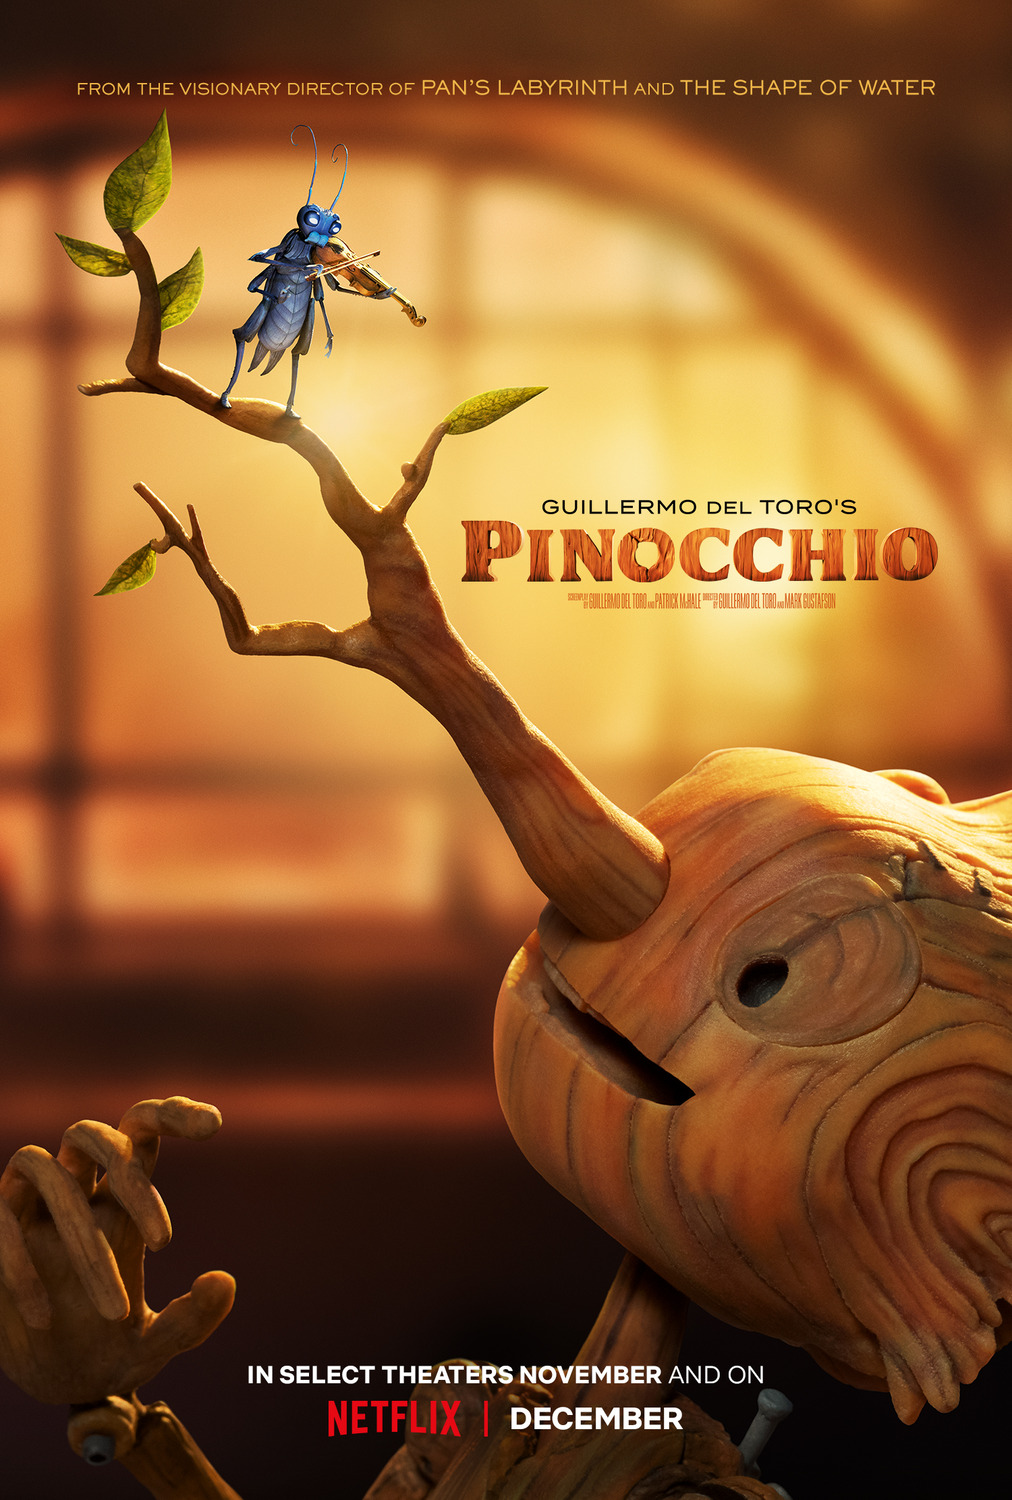 Extra Large Movie Poster Image for Guillermo del Toro's Pinocchio 